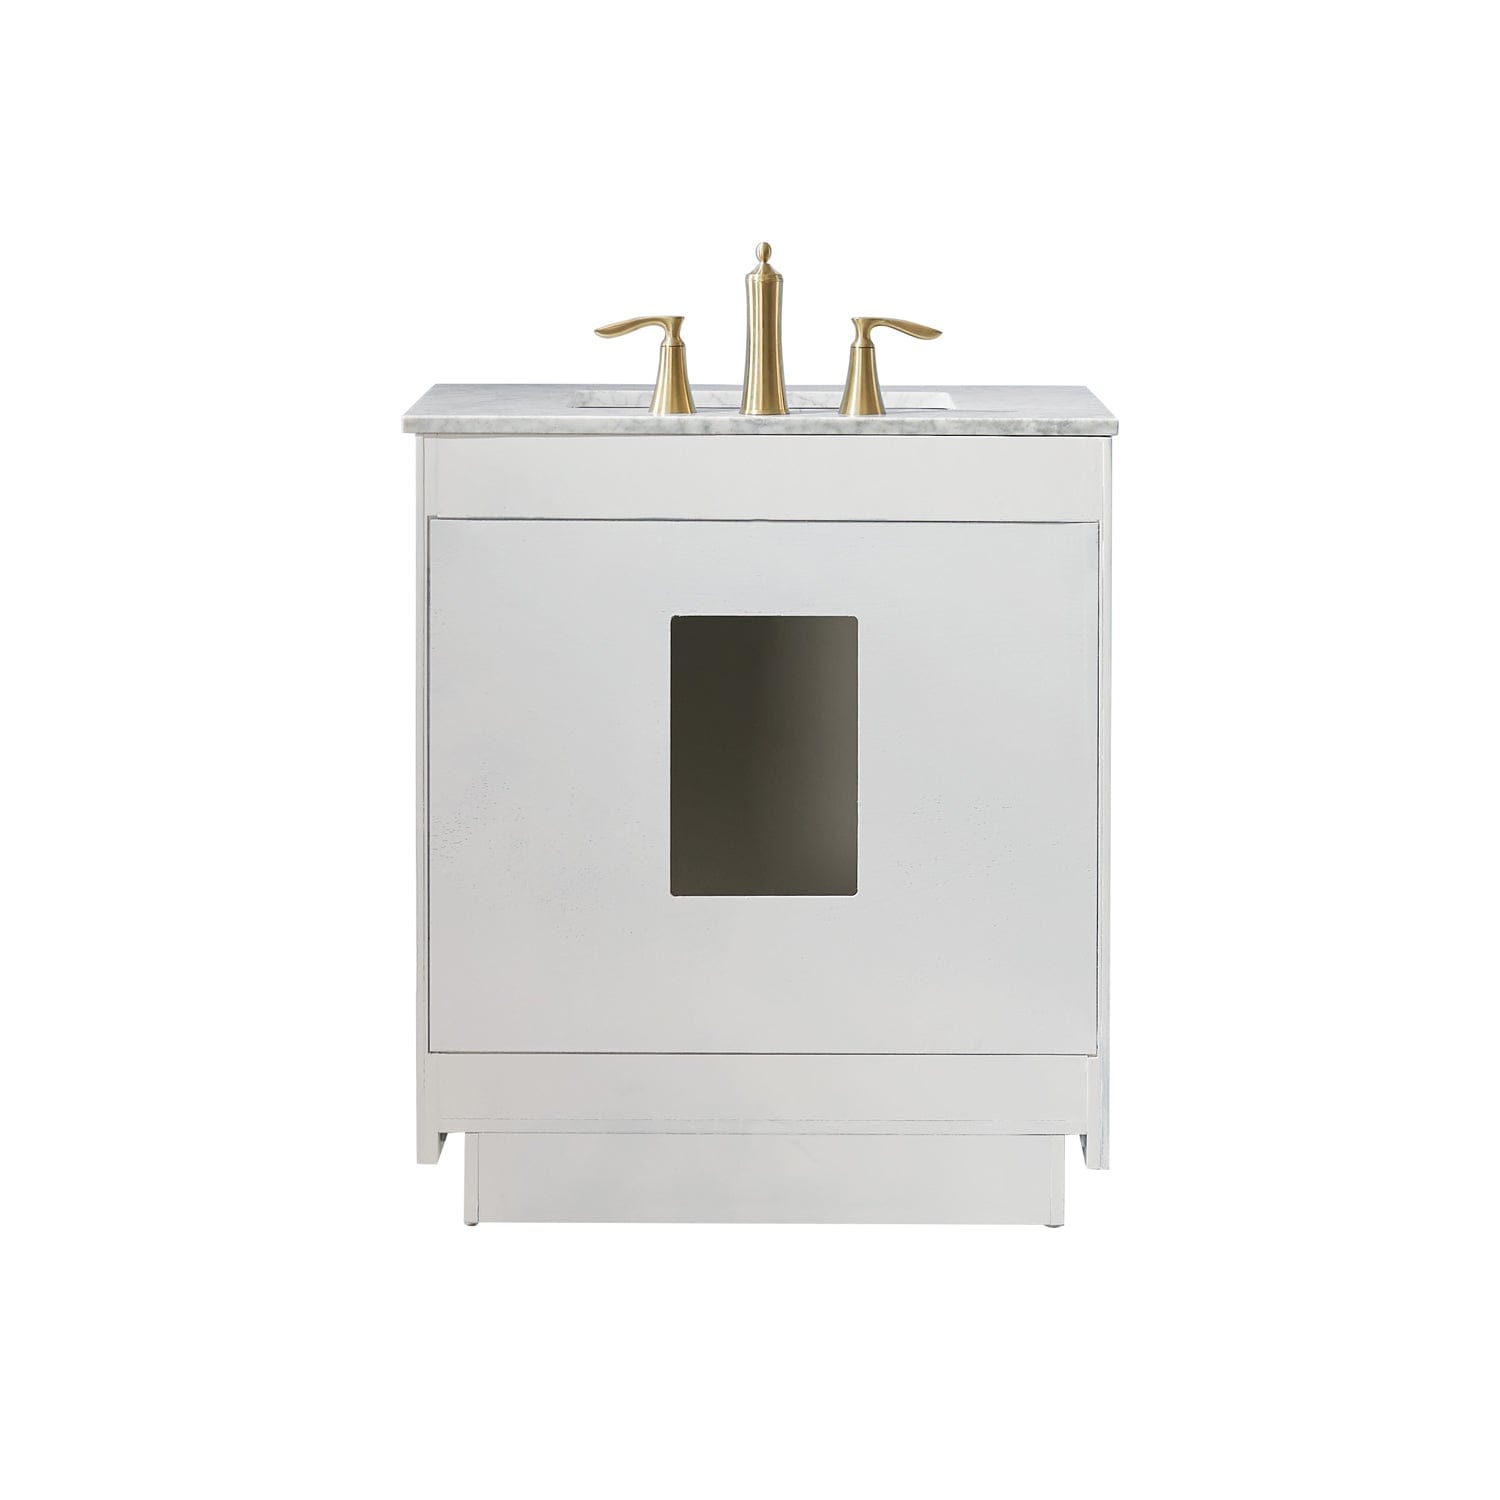 Altair Ivy 30" Single Bathroom Vanity Set in White and Carrara White Marble Countertop without Mirror 531030-WH-CA-NM - Molaix631112971089Vanity531030-WH-CA-NM